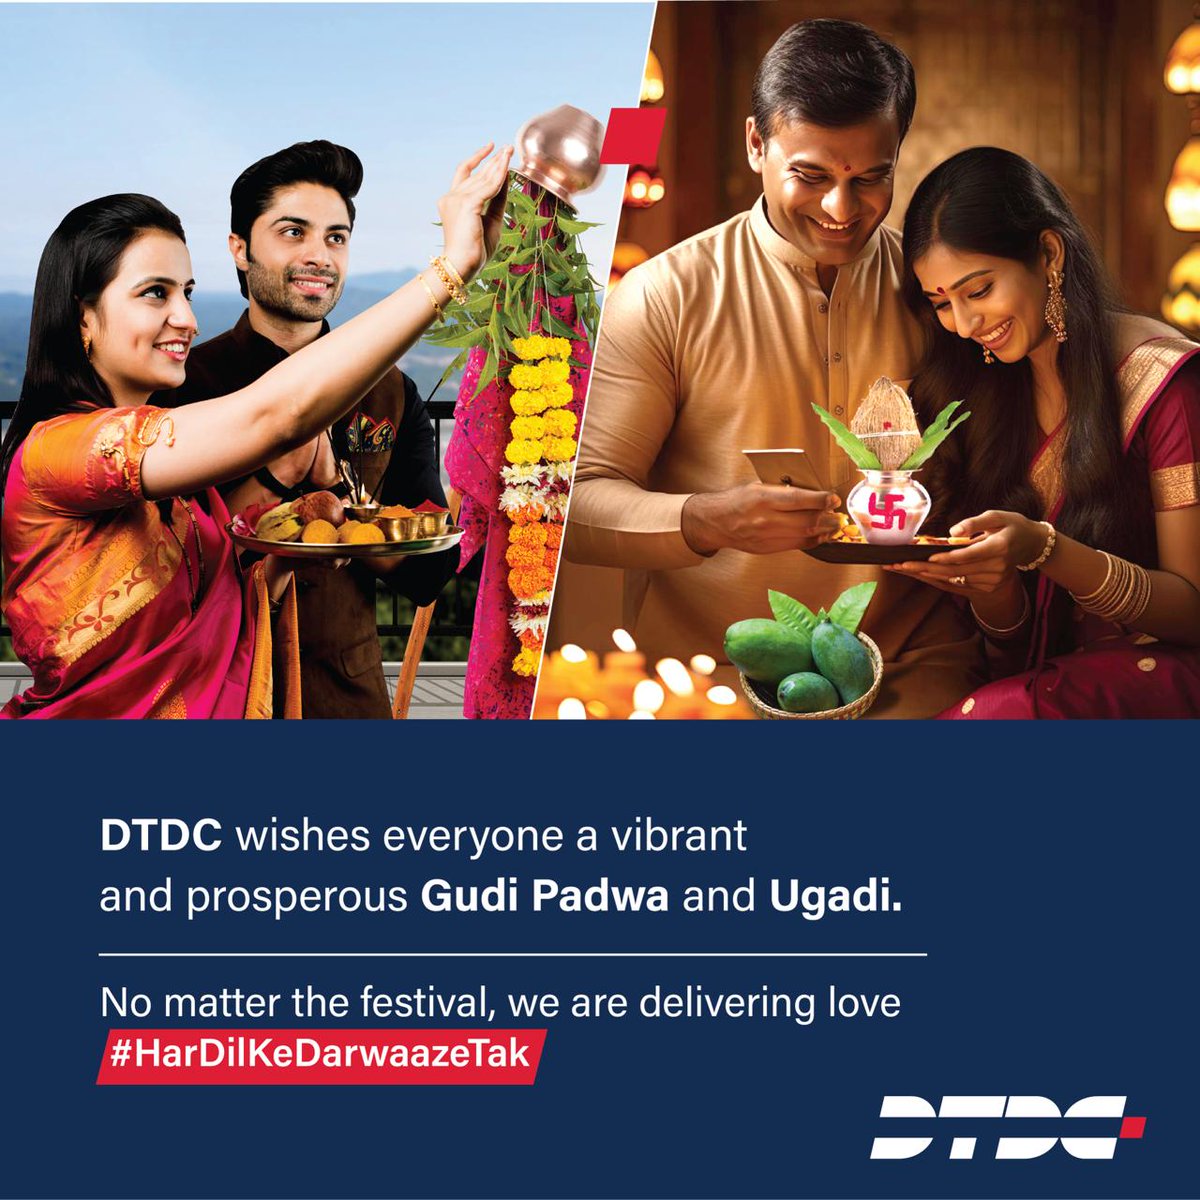 Wishing you a prosperous Gudi Padwa and Ugadi! This festive season, DTDC is delivering joy and happiness straight to your heart. Here's to new beginnings and delightful celebrations! 🌟🎊 #DTDC #GudiPadwa #Ugadi #FestiveDeliveries #LetsGrowTogether